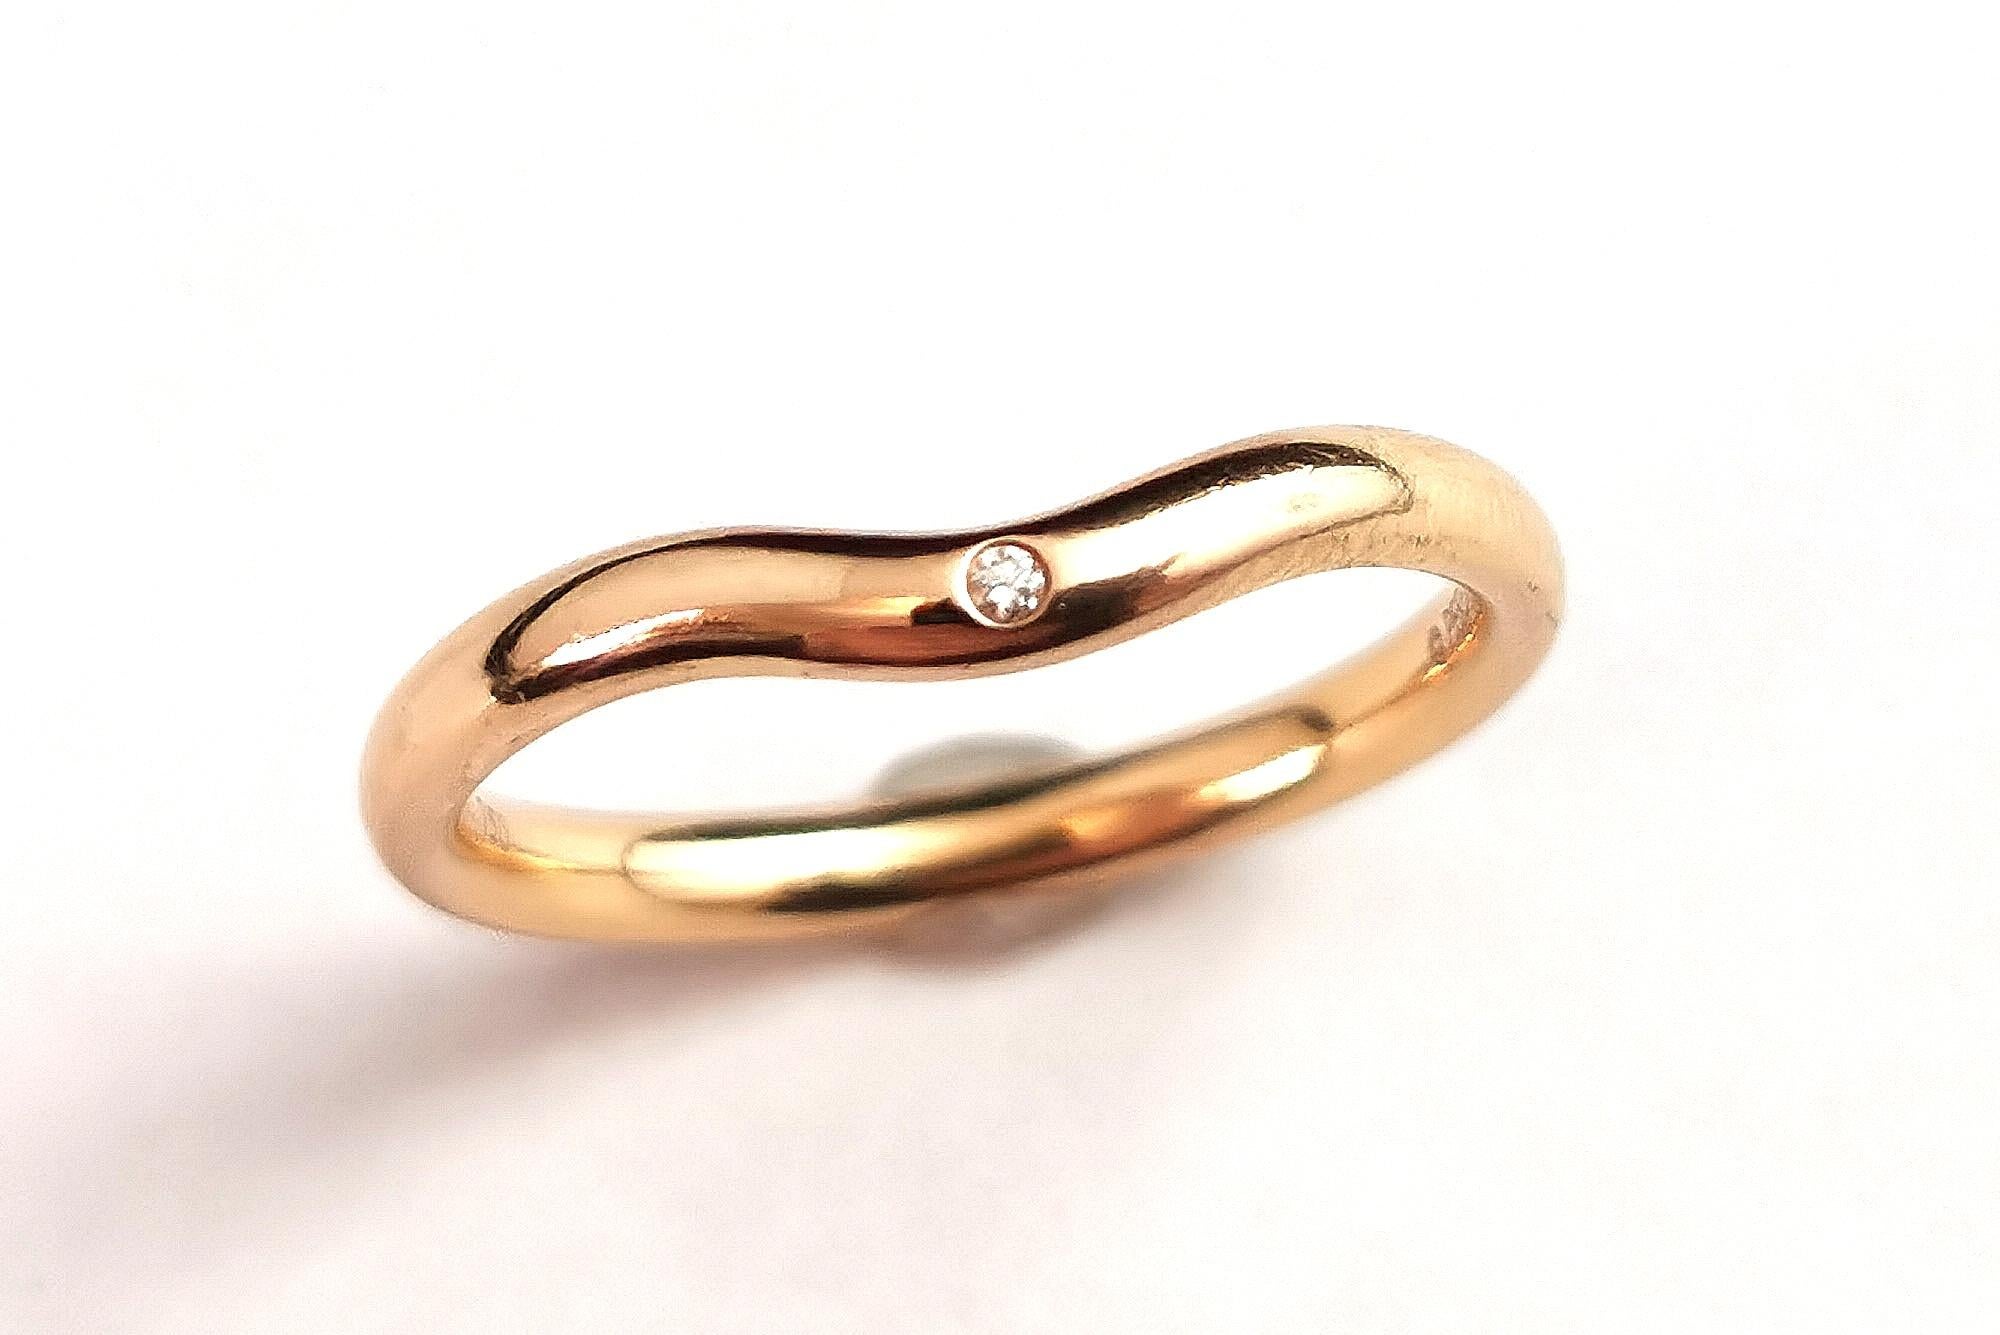 A beautiful vintage Elsa Peretti for Tiffany Classic 18kt yellow gold wedding band ring.

It has a smooth rich polished 18kt gold finish with a chevron or light wishbone shape to it.

The front is set with a single cut sparkling diamond.

A perfect